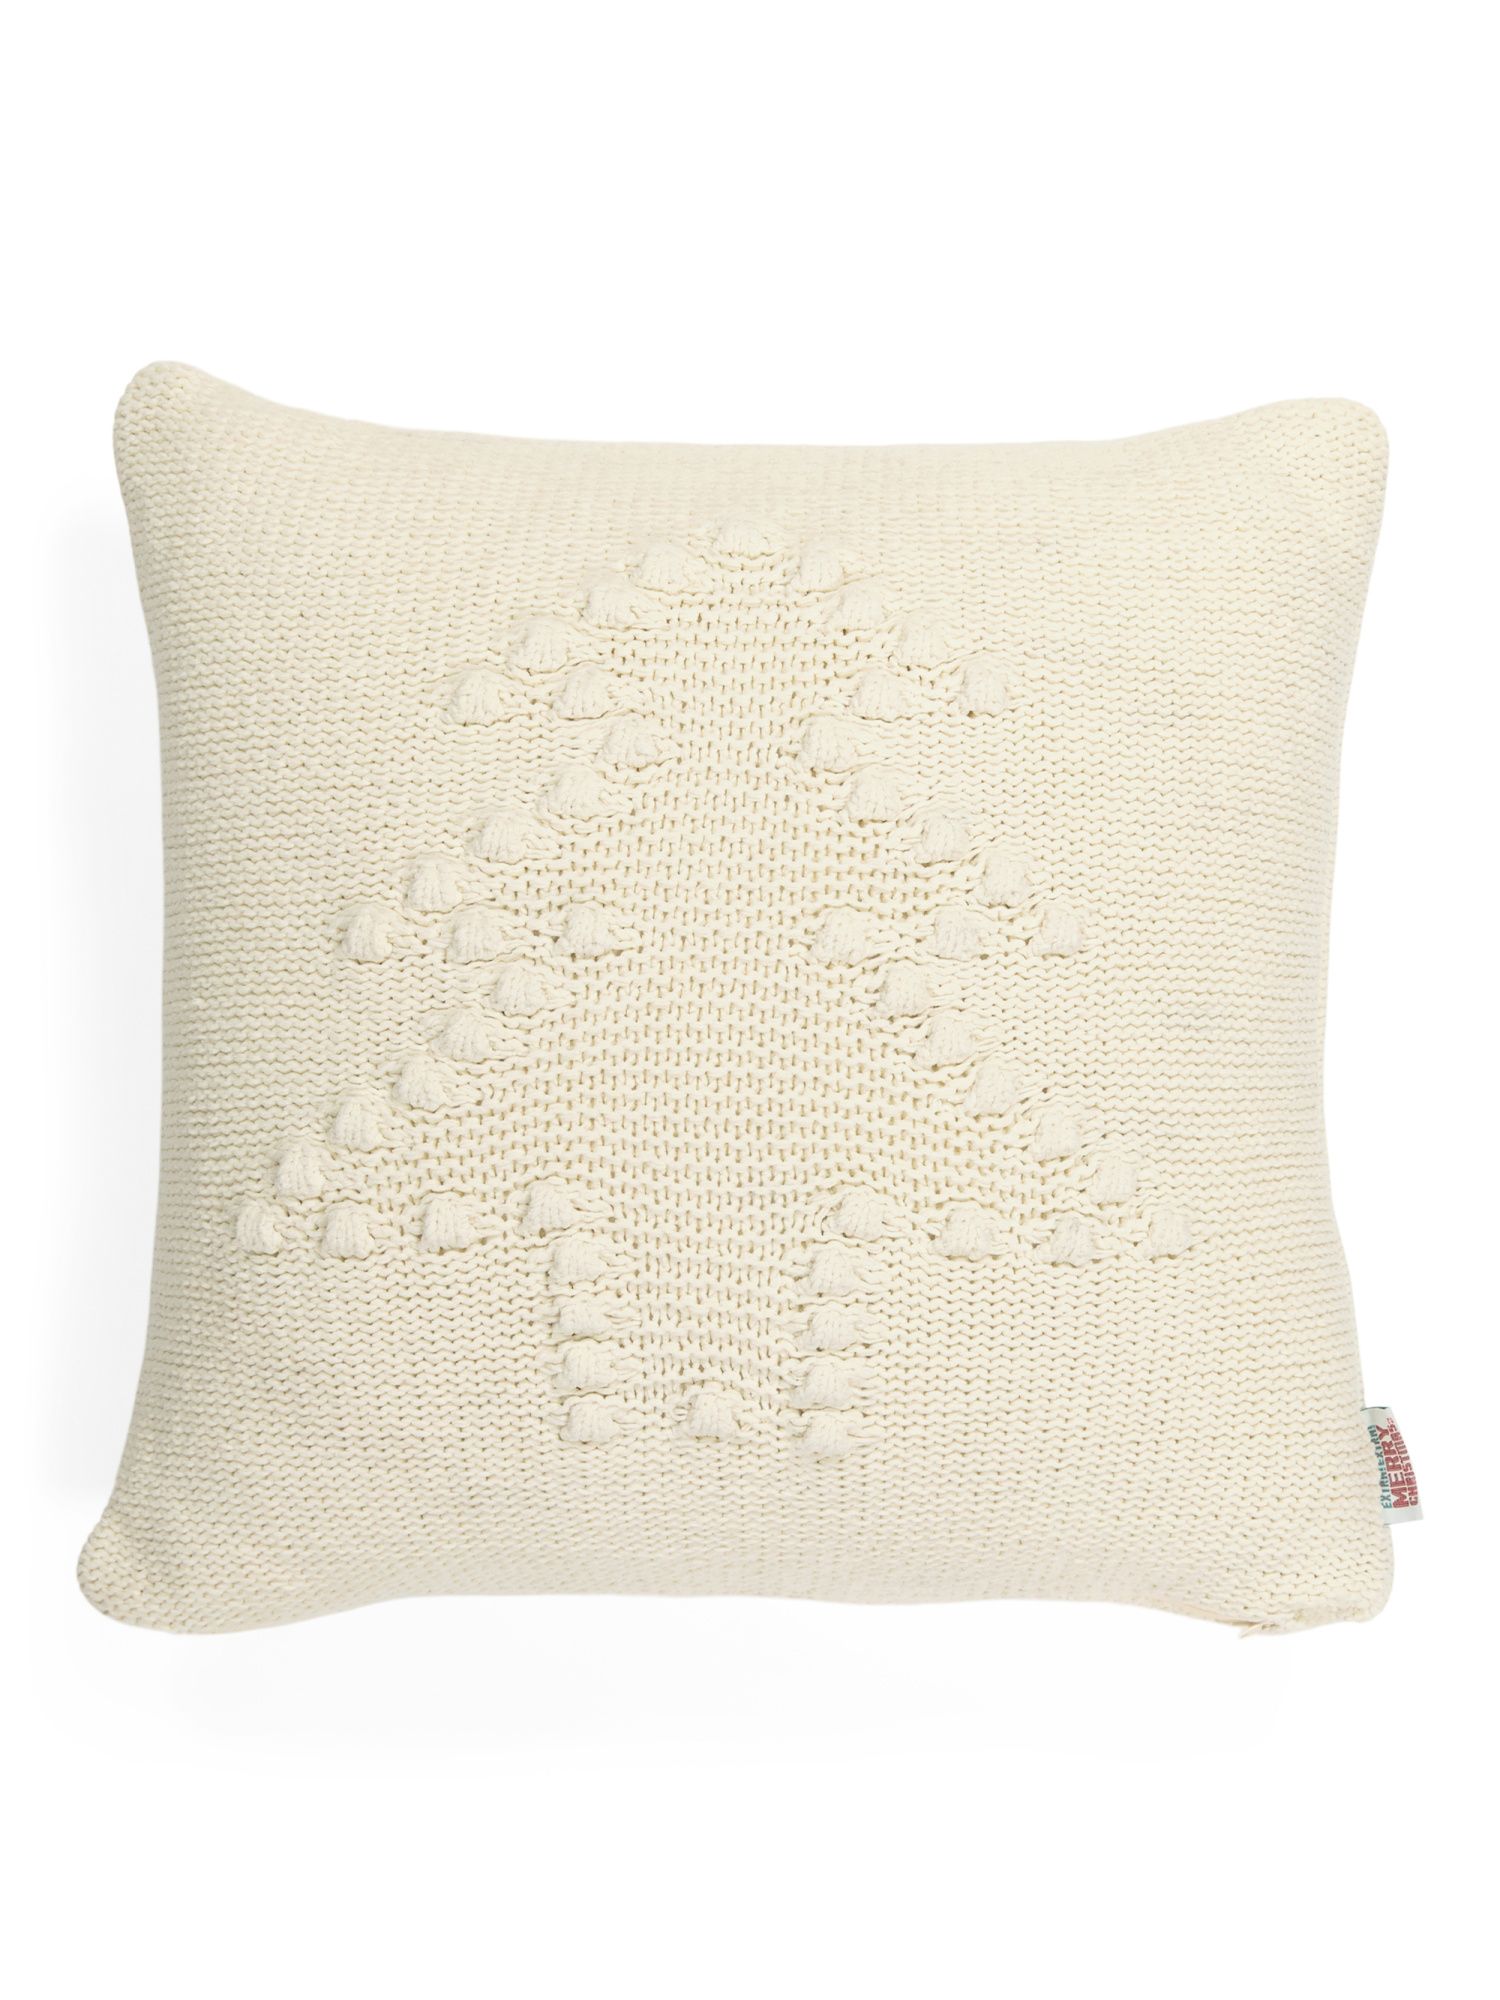 20x20 Chenille Knotted Tree Pillow | TJ Maxx